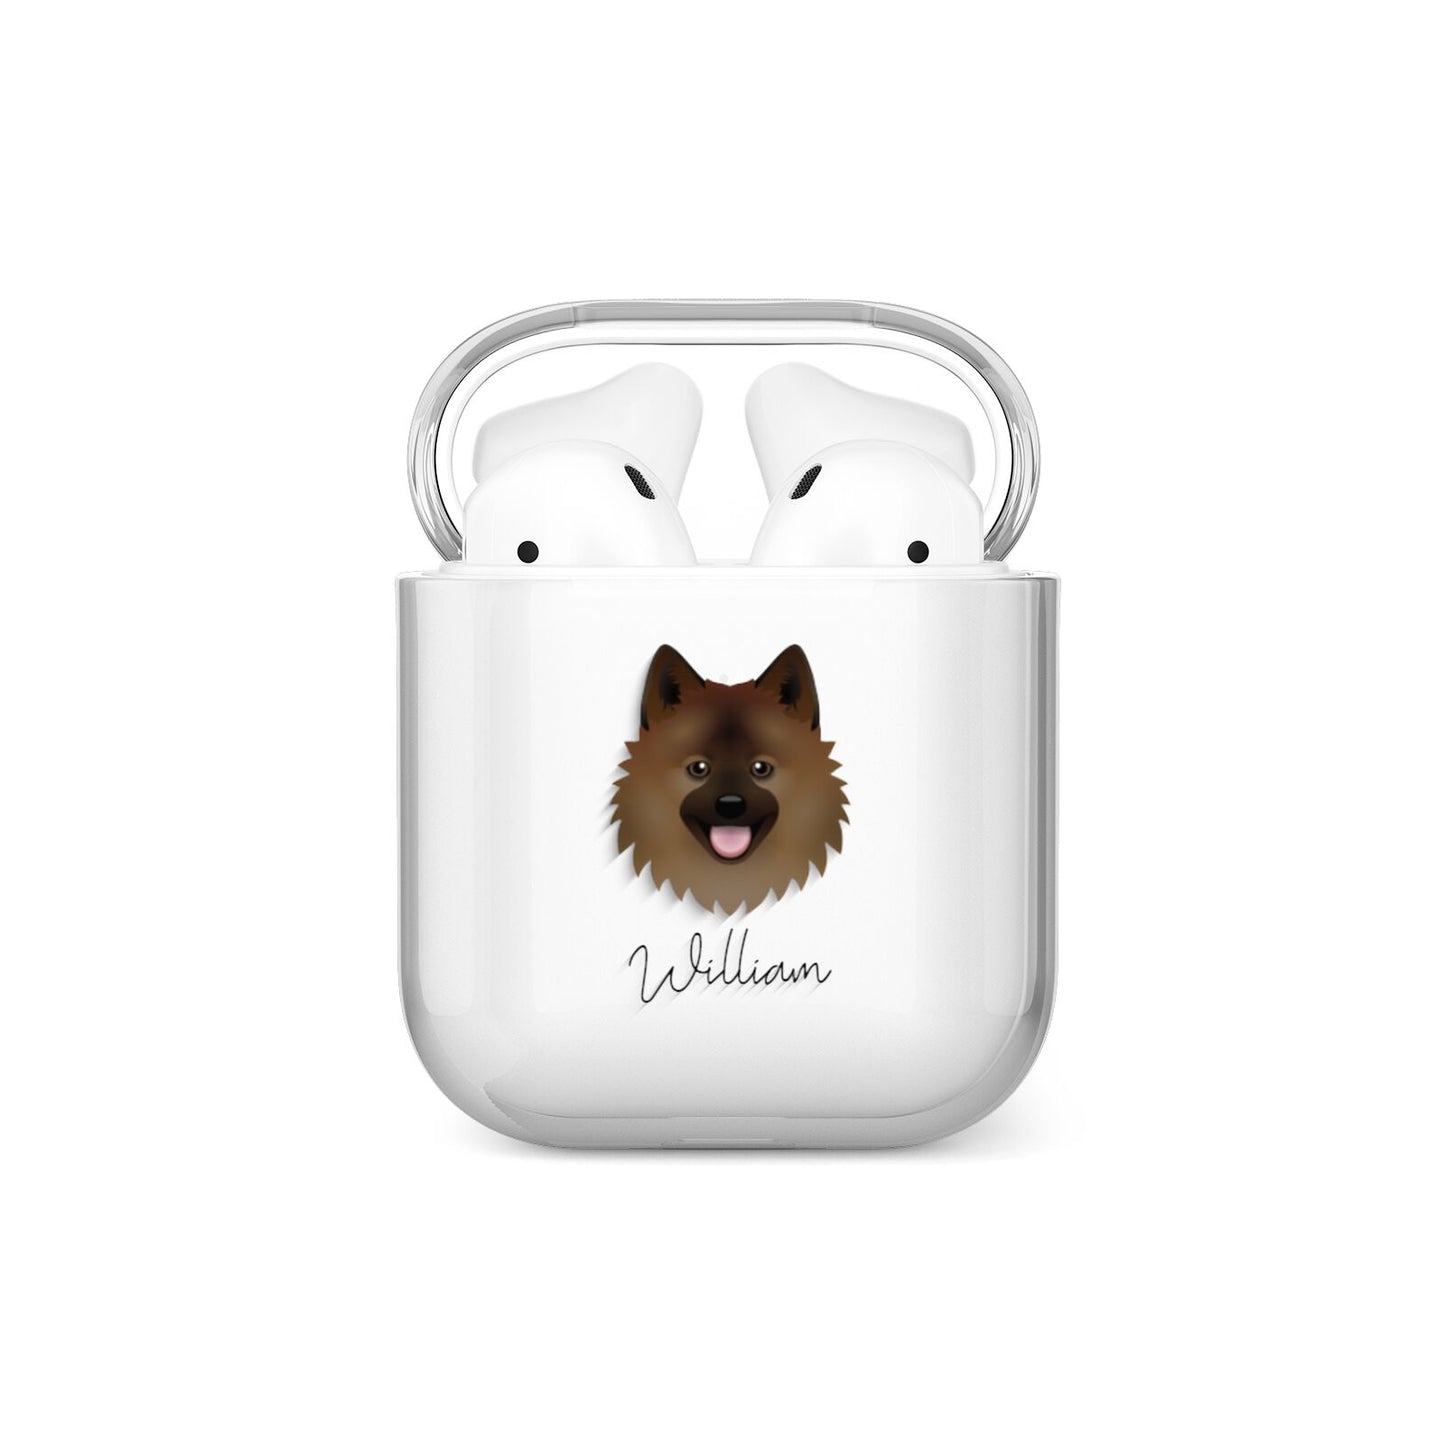 German Spitz Personalised AirPods Case